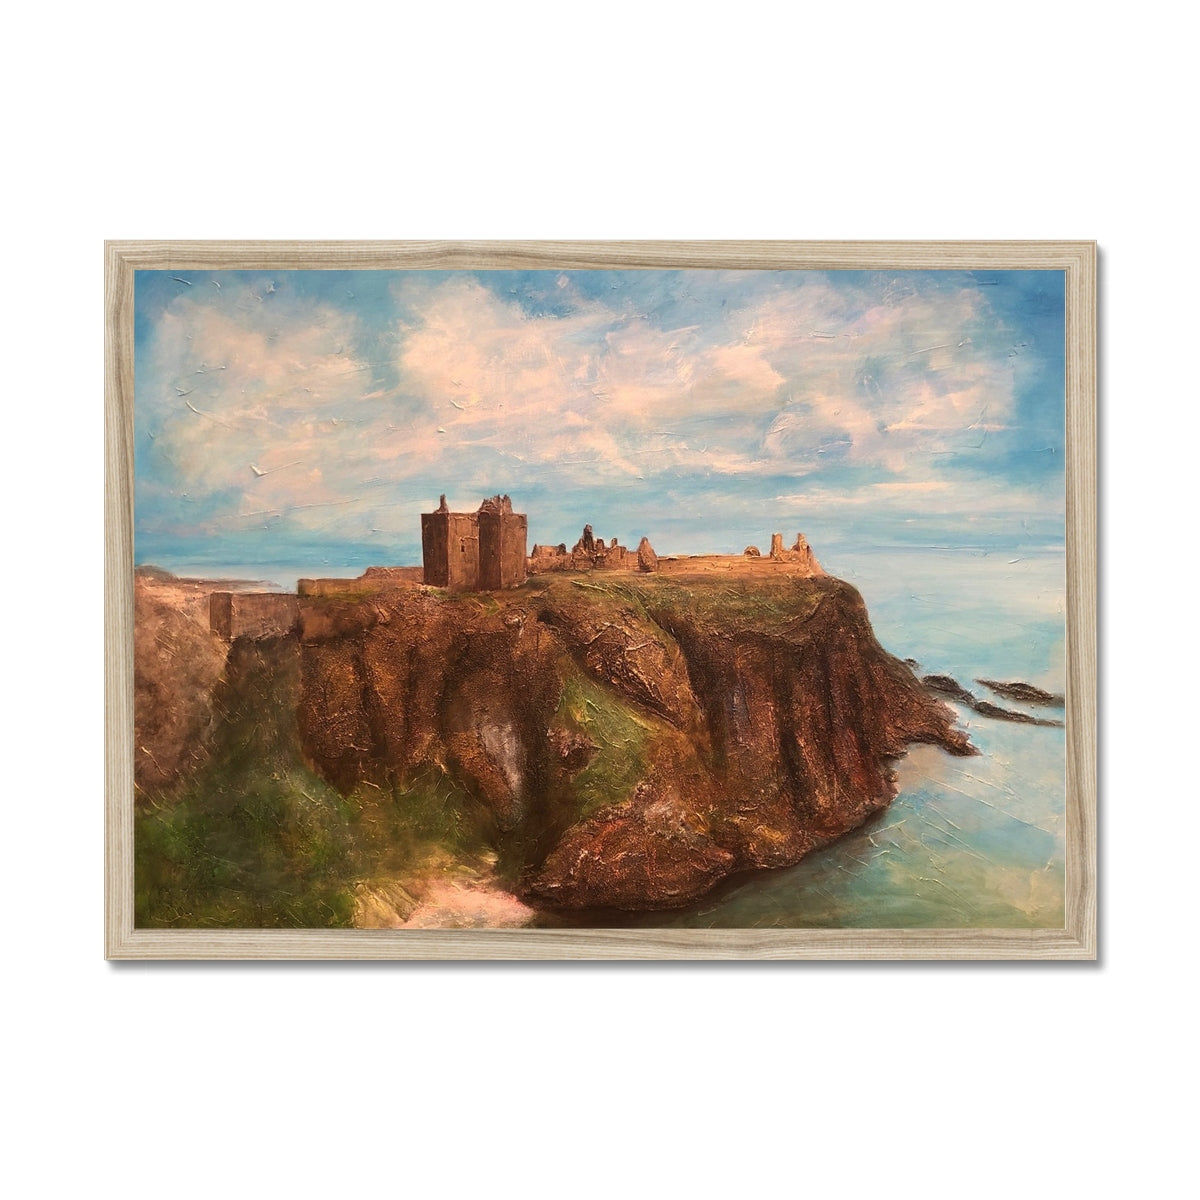 Dunnottar Castle Painting | Framed Prints From Scotland-Framed Prints-Historic & Iconic Scotland Art Gallery-A2 Landscape-Natural Frame-Paintings, Prints, Homeware, Art Gifts From Scotland By Scottish Artist Kevin Hunter